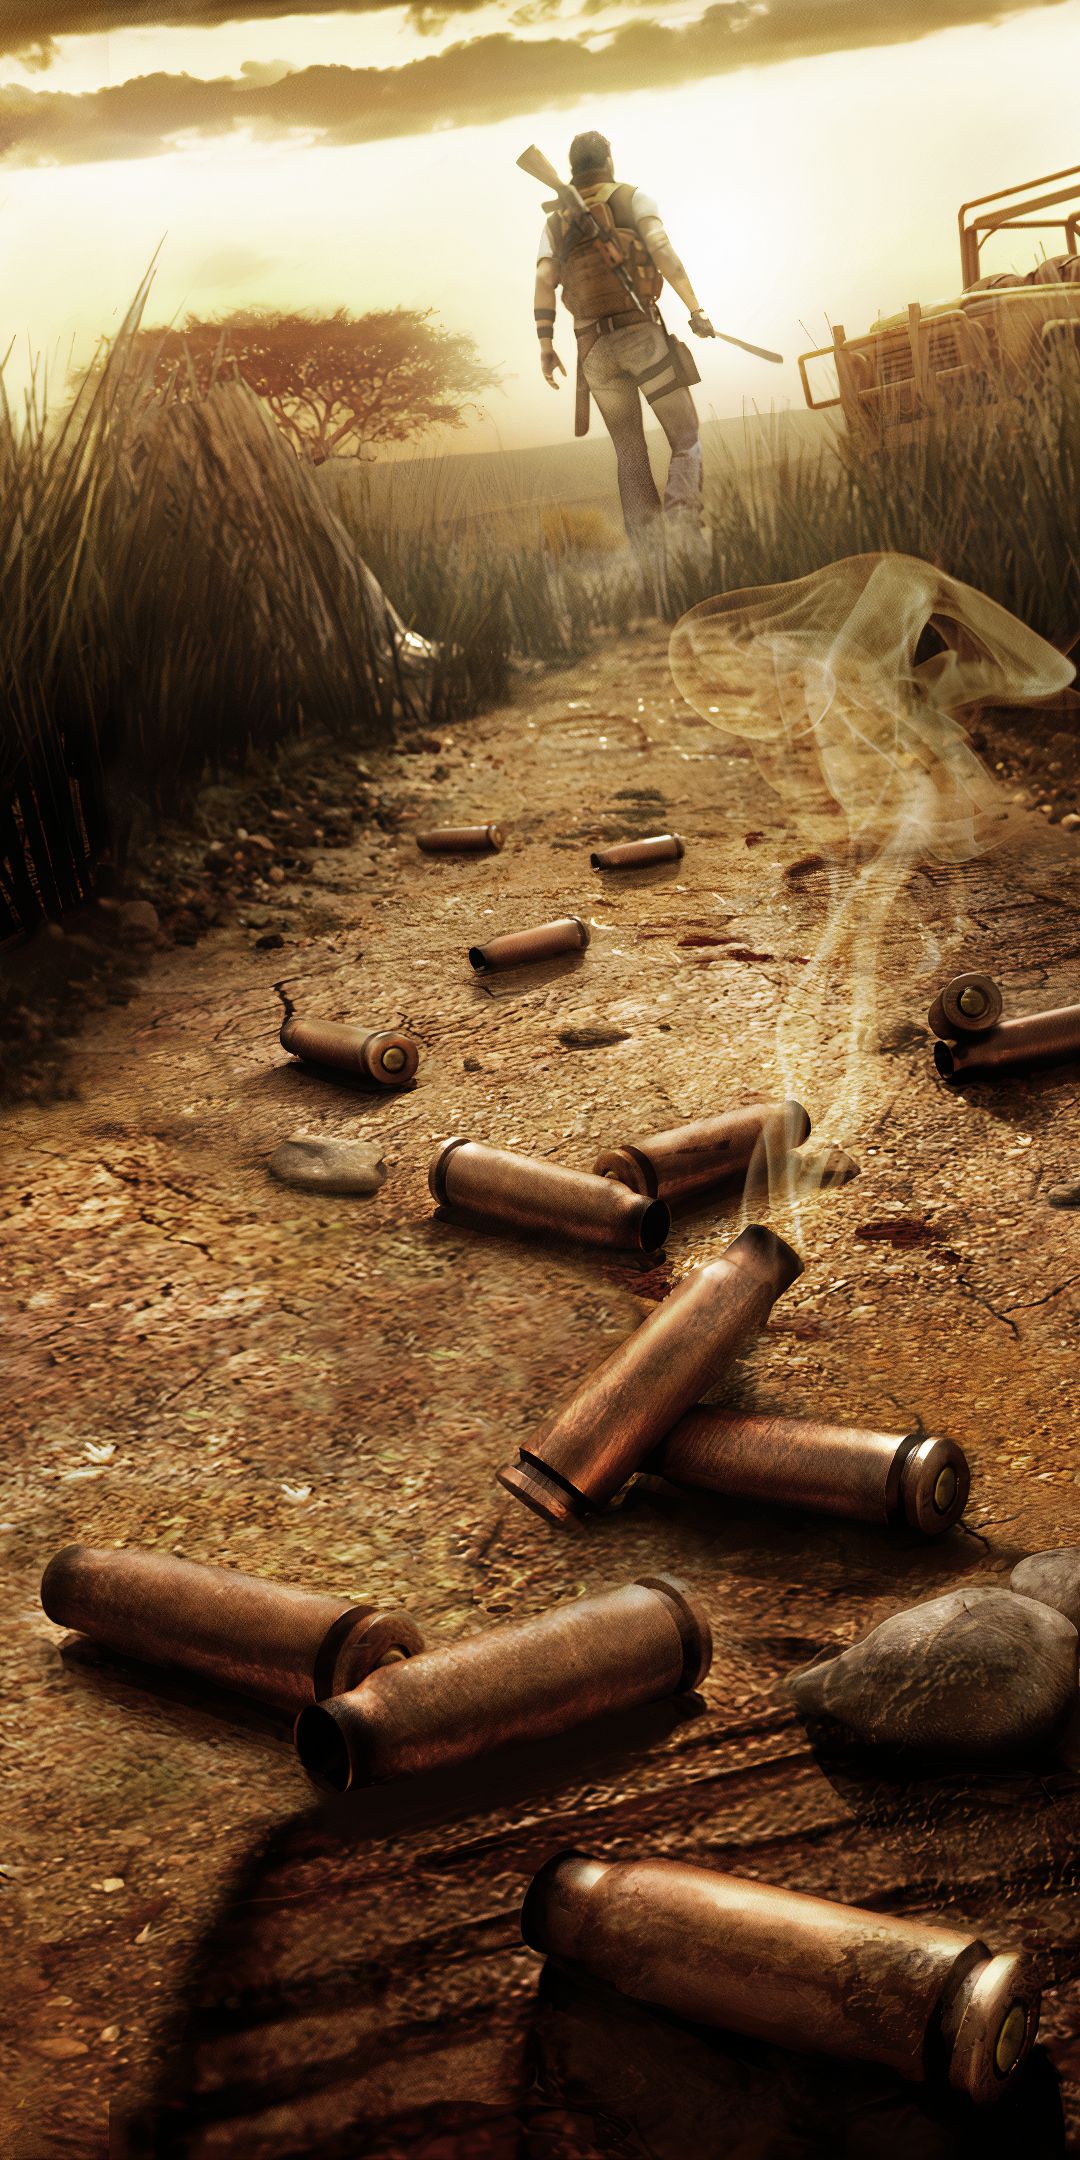 far cry 2, video game, far cry High Definition image